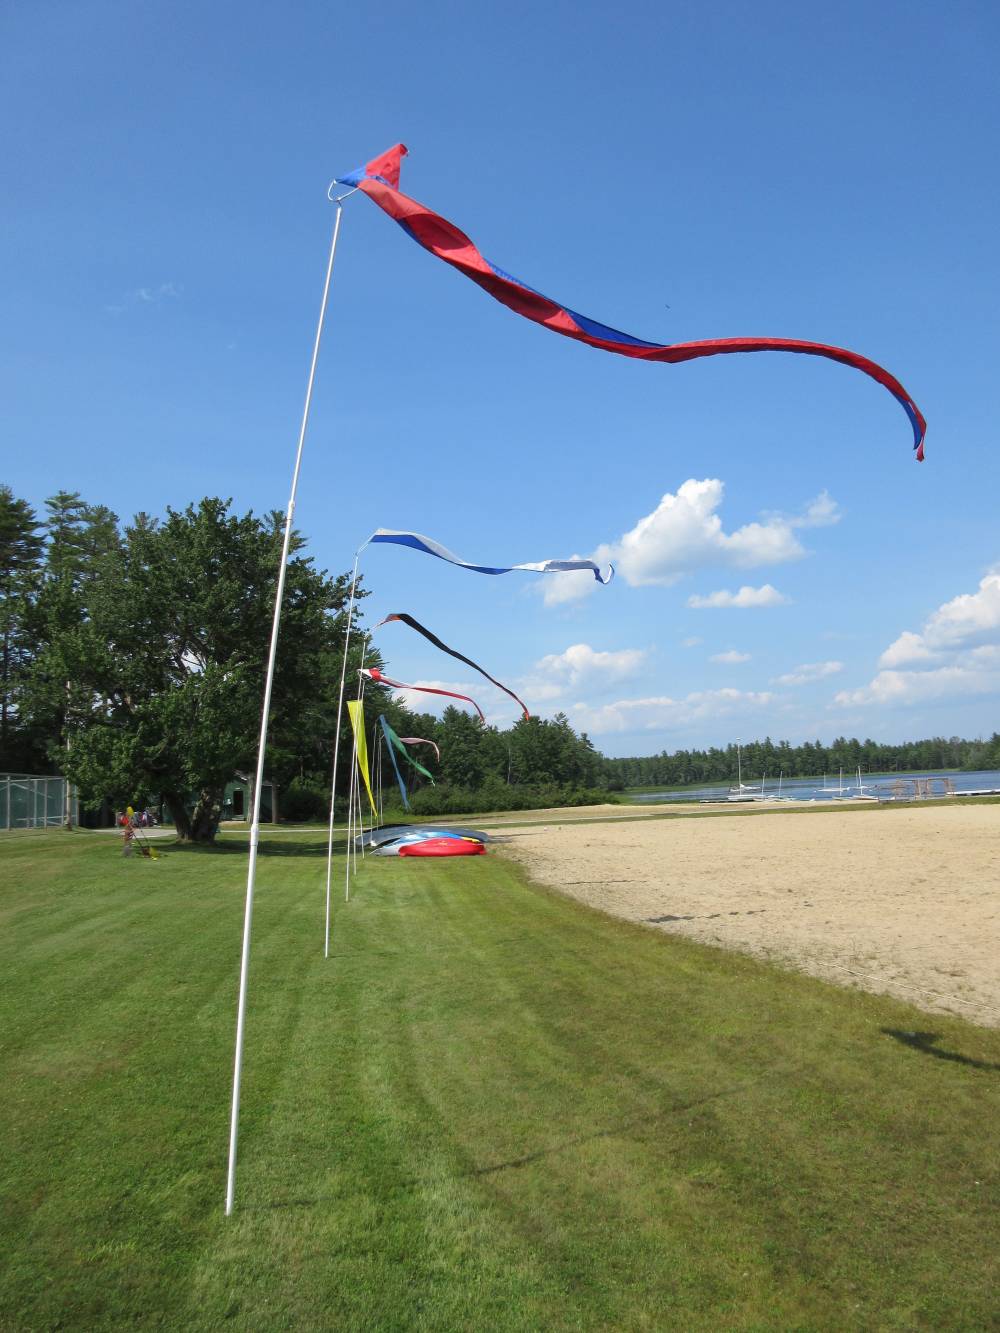 TOP MAINE ACADEMIC CAMP: Tripp Lake Camp is a Top Academic Summer Camp located in Poland Maine offering many fun and enriching Academic and other camp programs. 